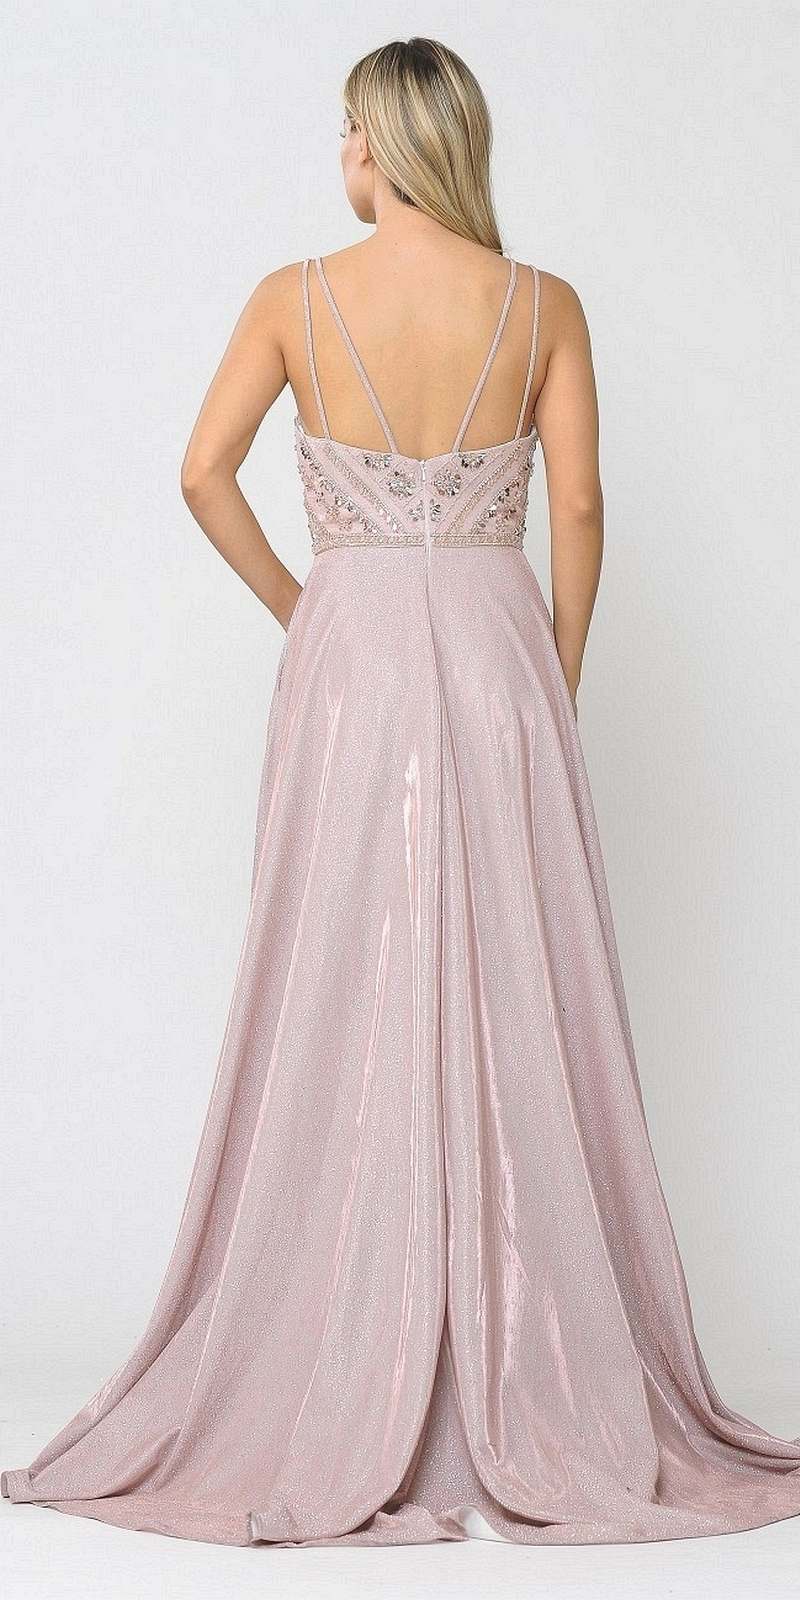 Poly USA 8414 Embellished Rose Gold Long Prom Dress with Pockets